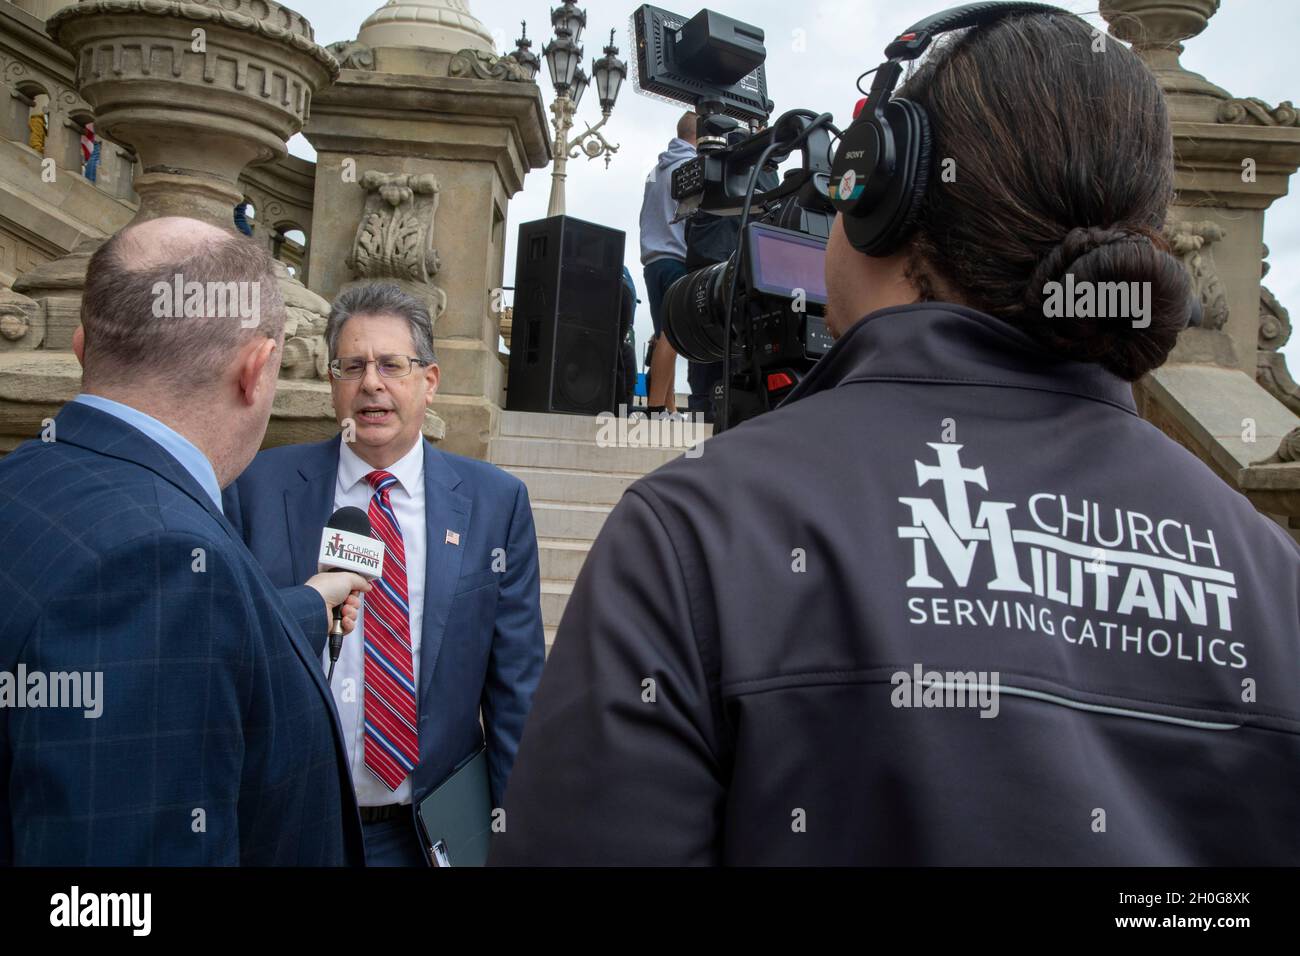 Lansing, Michigan, USA. 12th Oct, 2021. A TV crew from the conservative Catholic Church Militant interviews Matt DePerno, a Trump-endorsed candidate for Michigan Attorney-General. DePerno was speaking at a rally at the Michigan State Capitol demanding a 'forensic audit' of the 2020 presidential election results. Former President Trump charges that voter fraud was the reason he lost the election in Michigan by more than 150,000 votes. Credit: Jim West/Alamy Live News Stock Photo